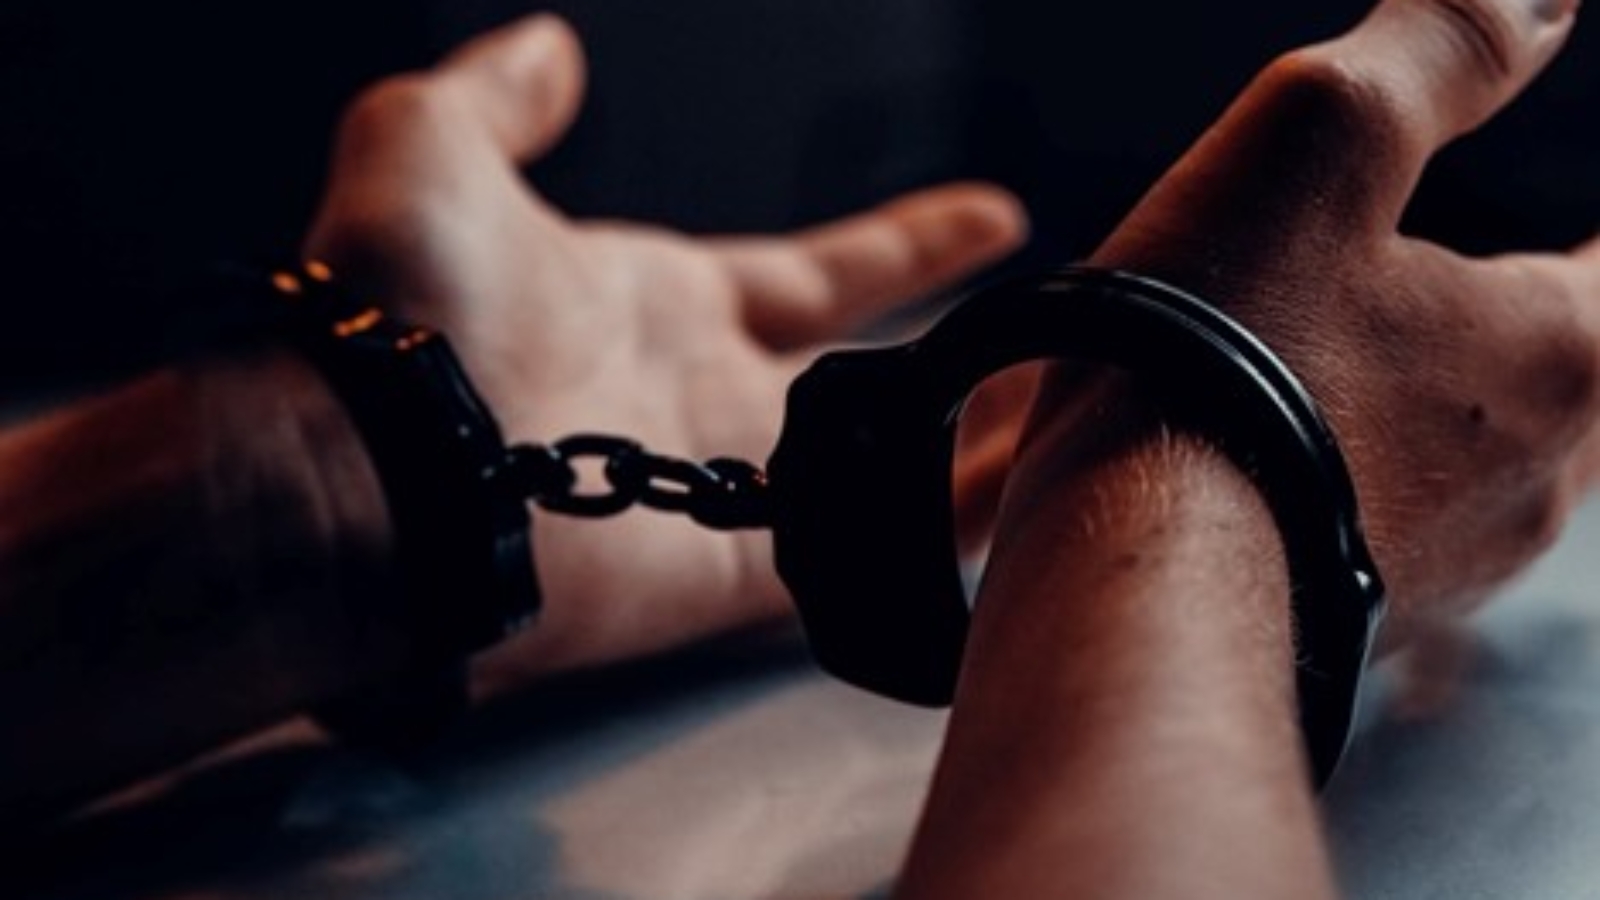 A person wearing handcuffs